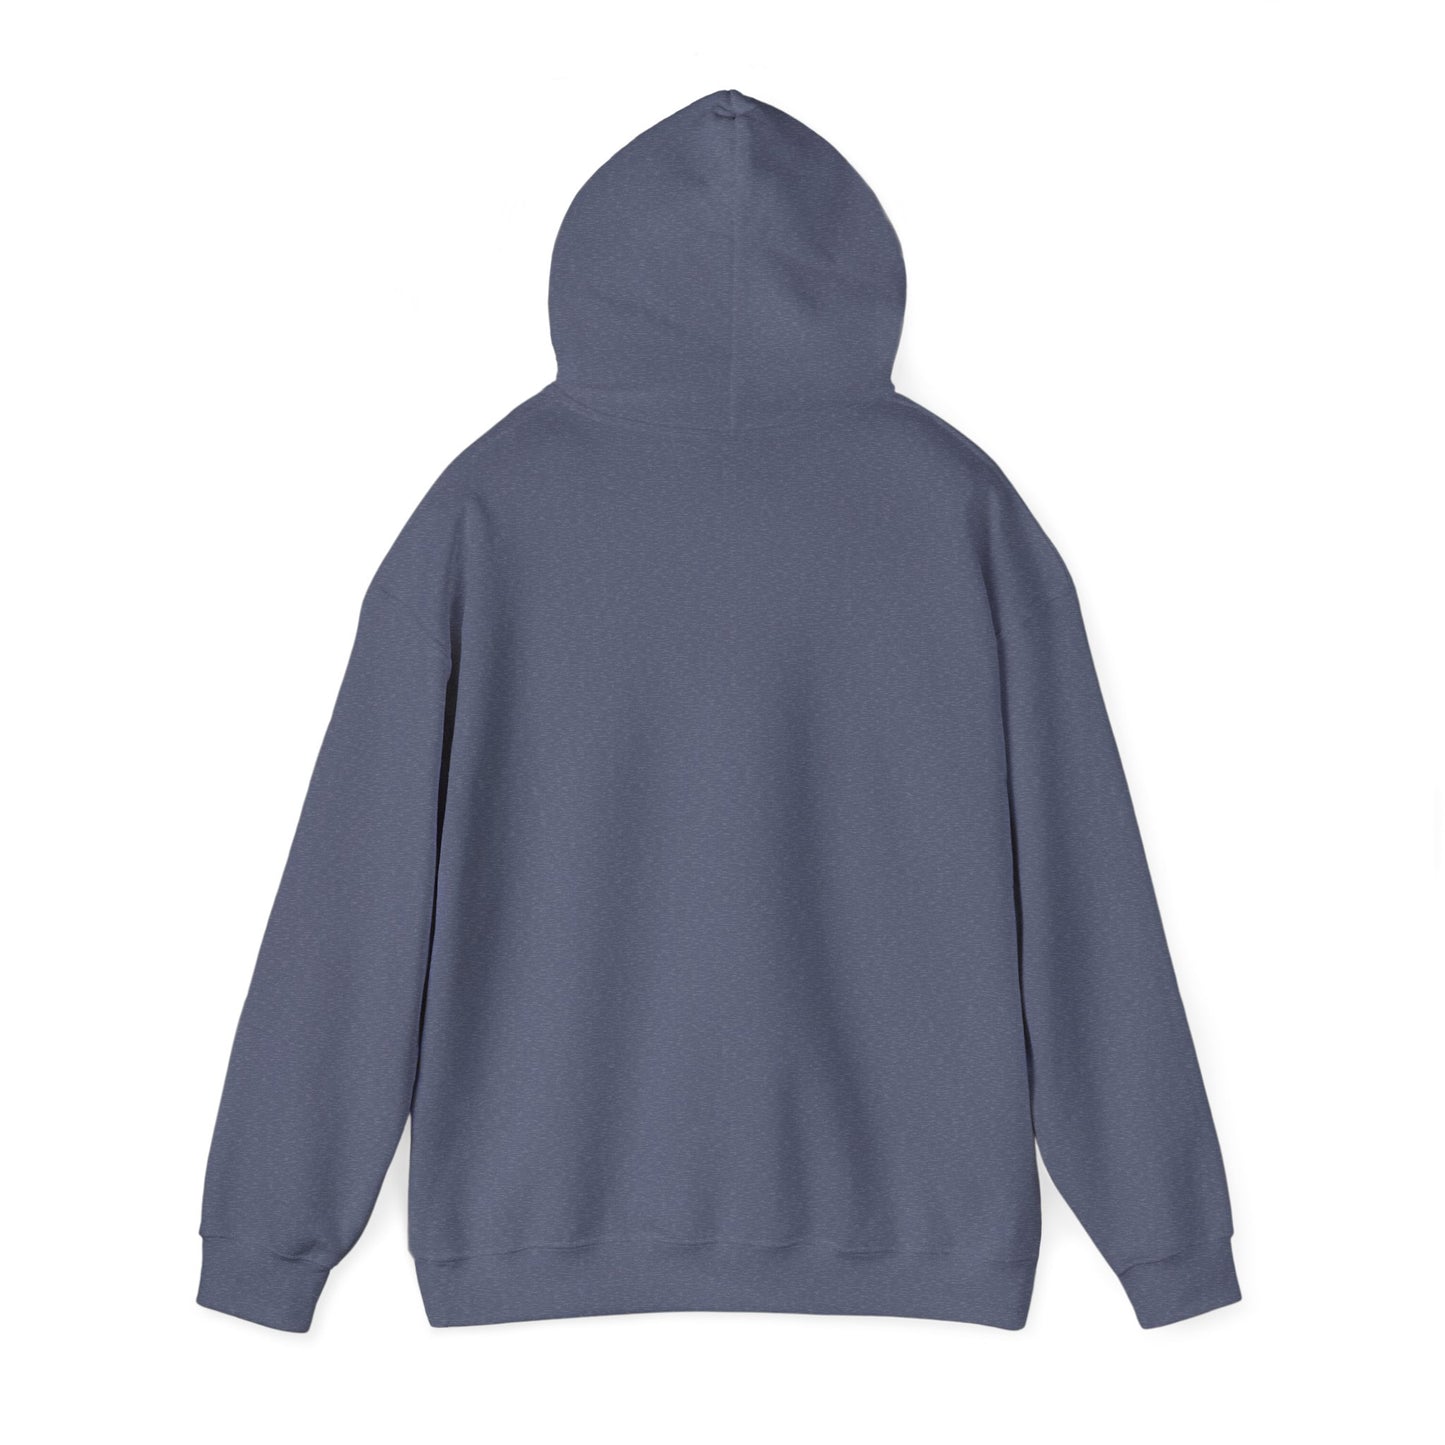 Unisex Heavy Blend™ Hooded Sweatshirt: lady with blue and purple hair